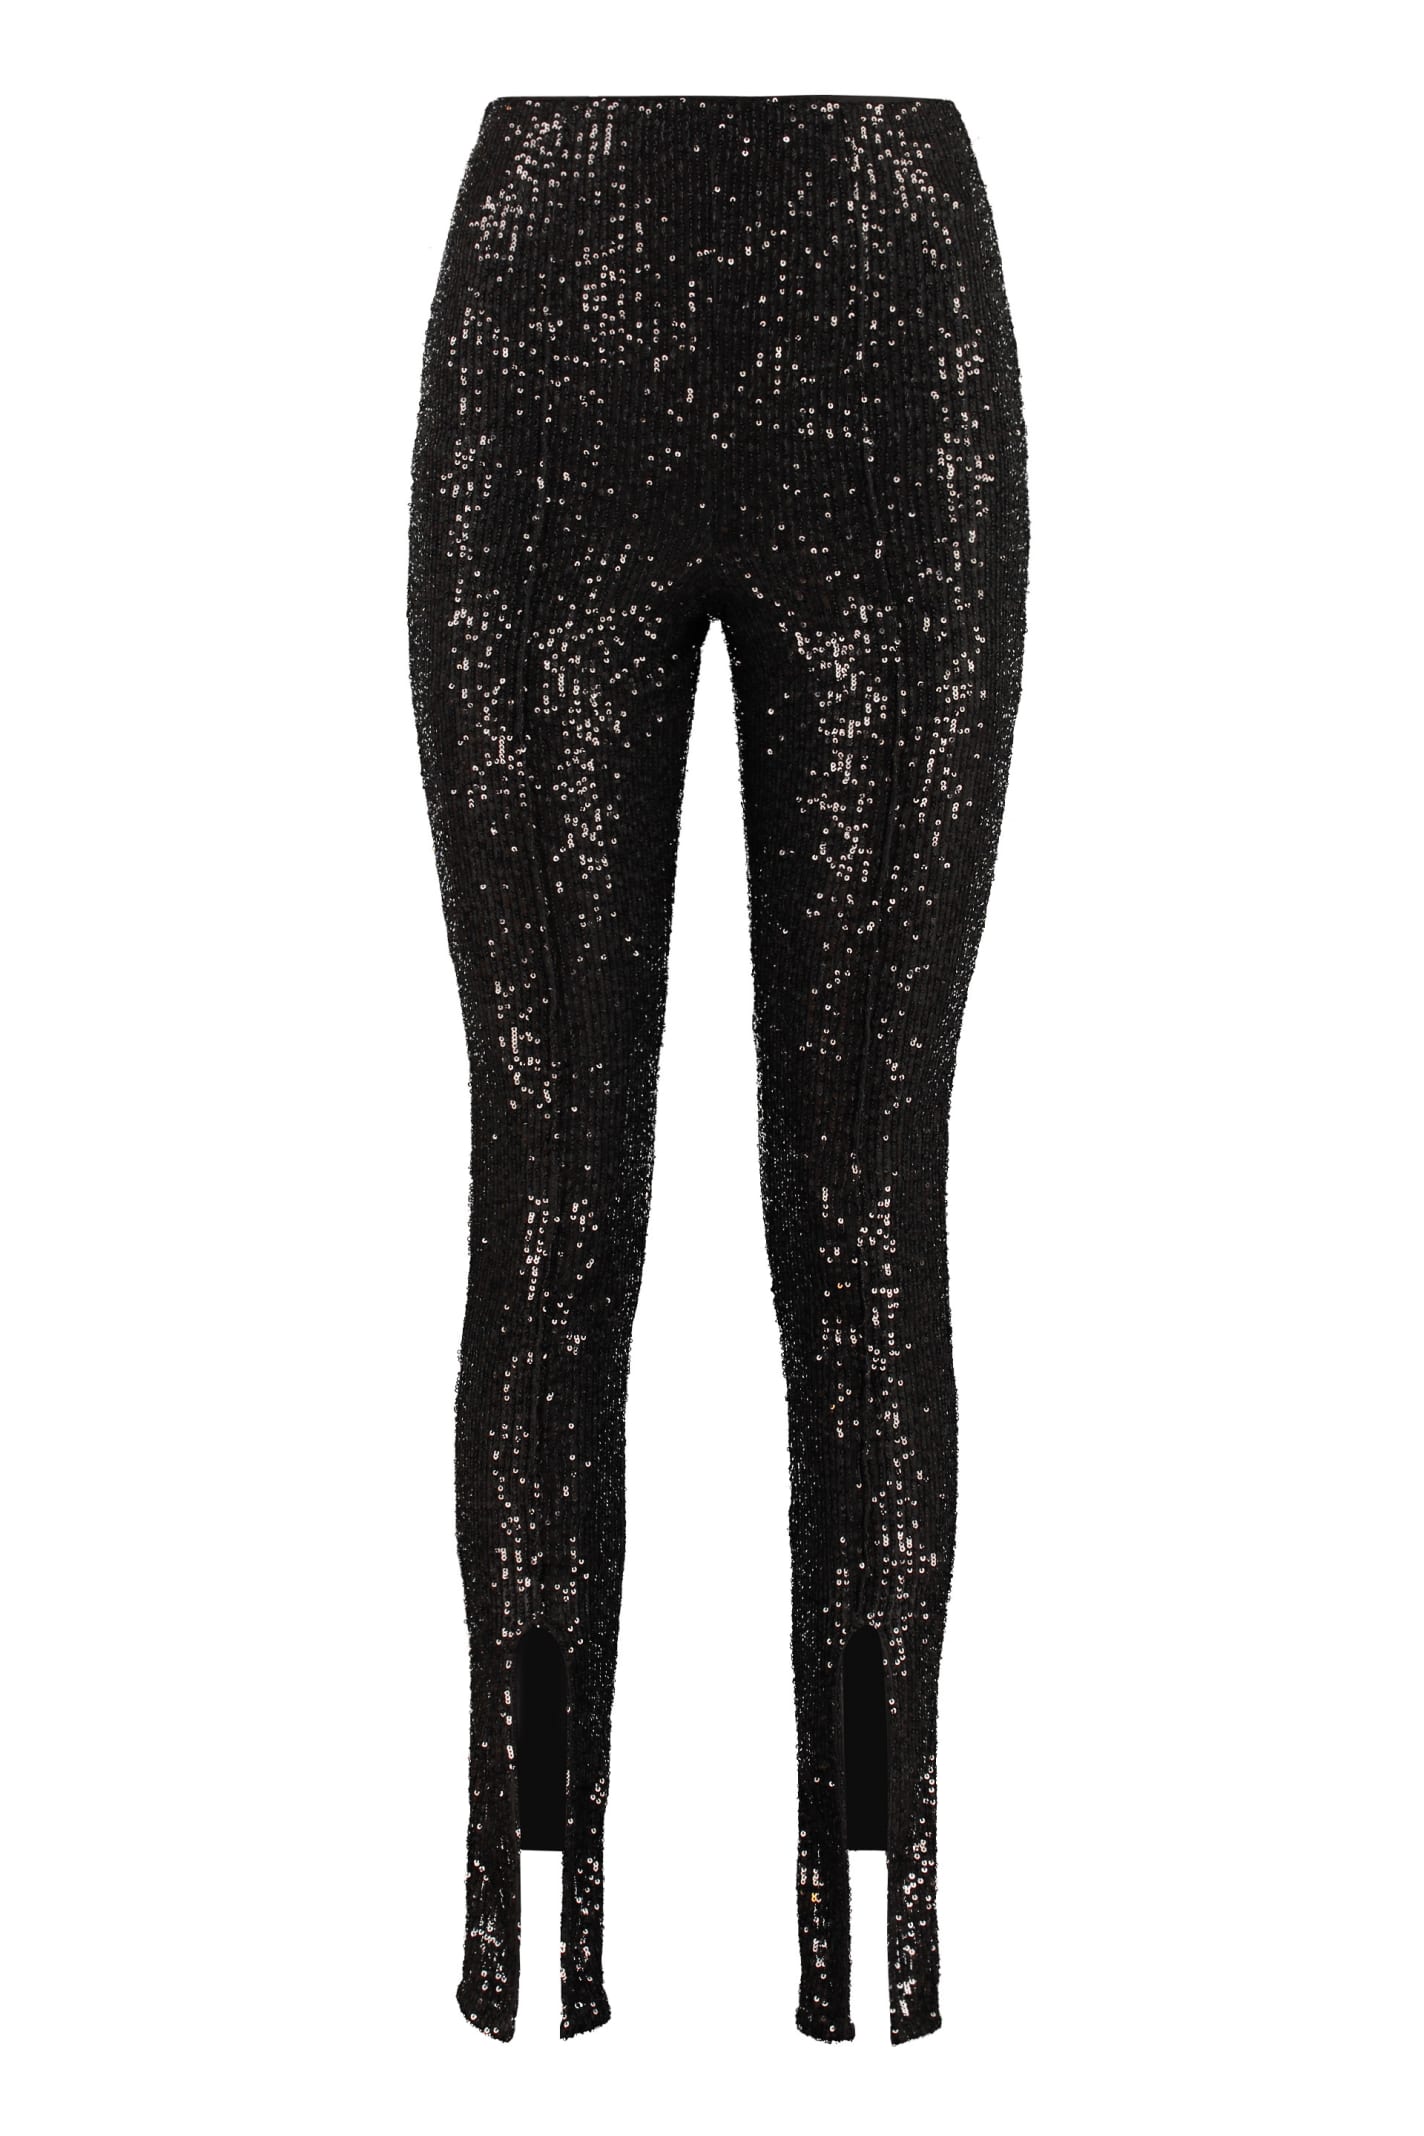 Rotate by Birger Christensen Alicia Sequin Trousers